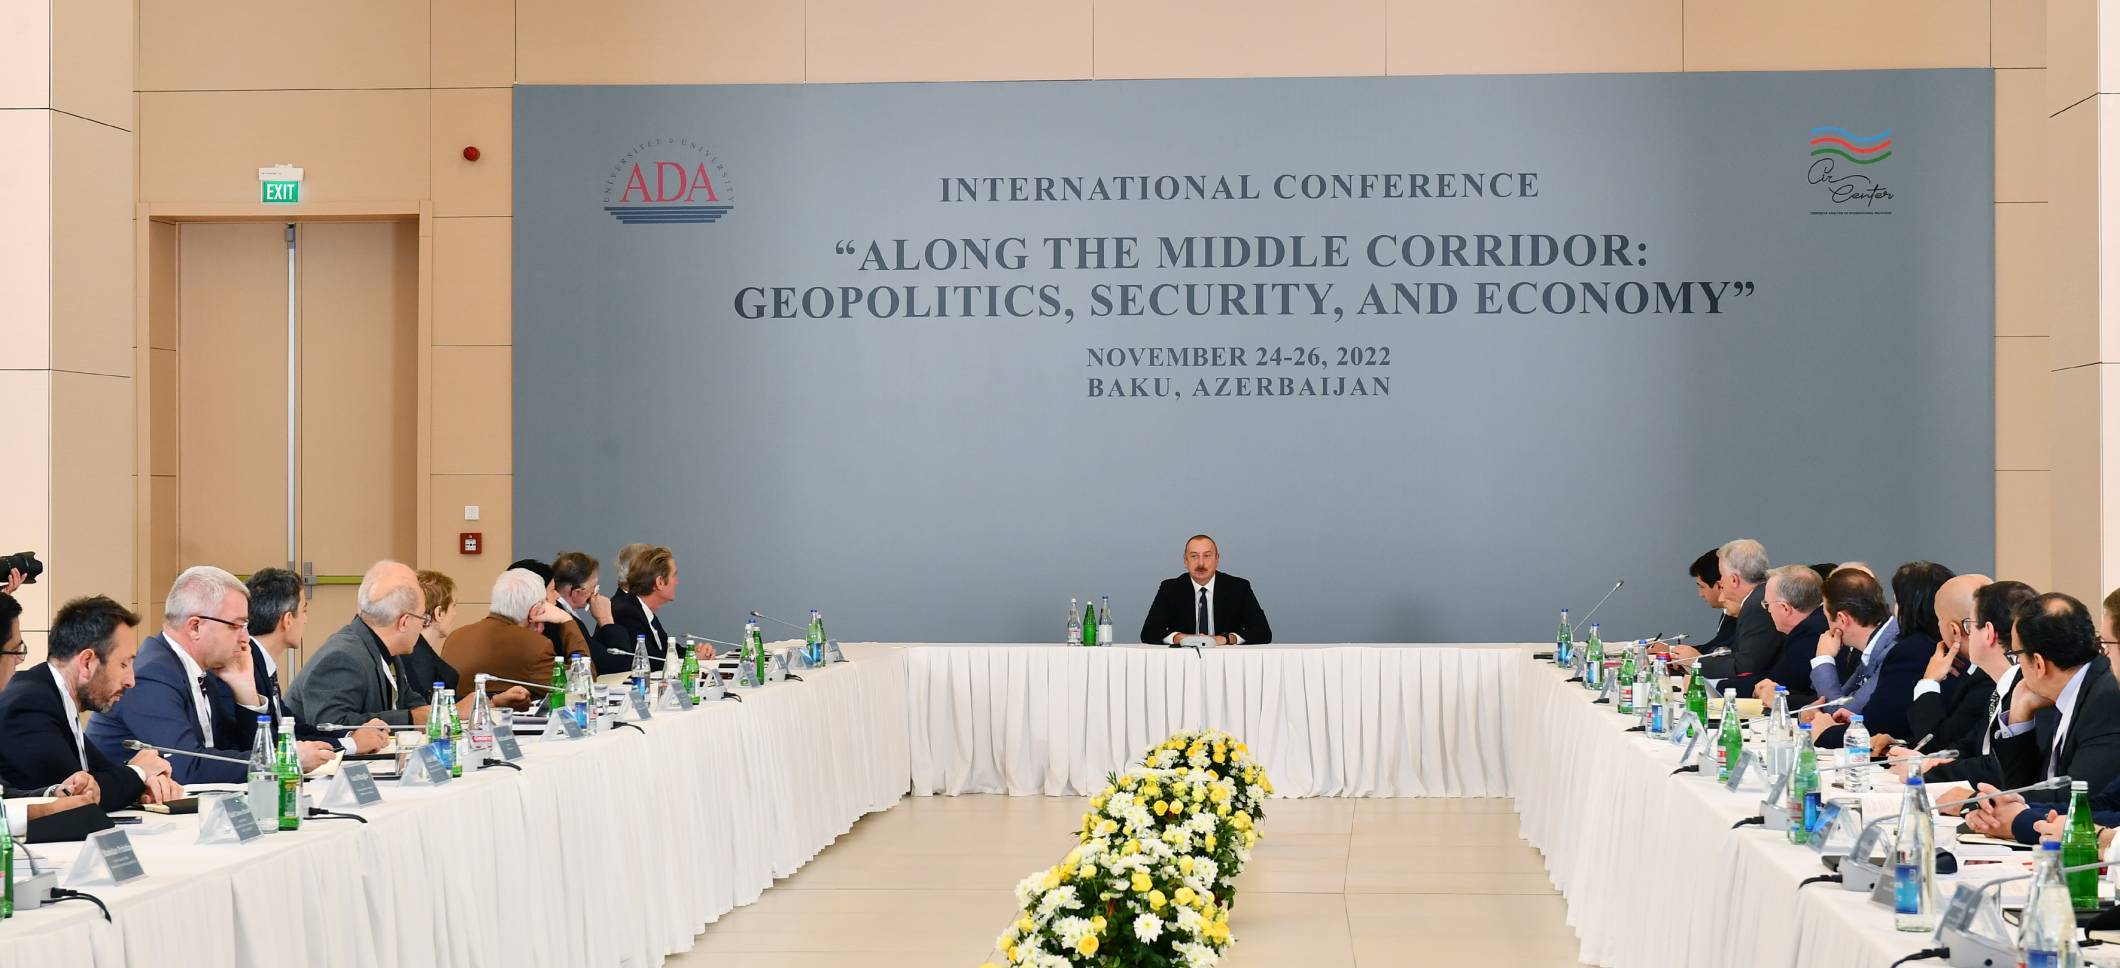 Ilham Aliyev attended the opening of the conference under the motto “Along the Middle Corridor: Geopolitics, Security and Economy”